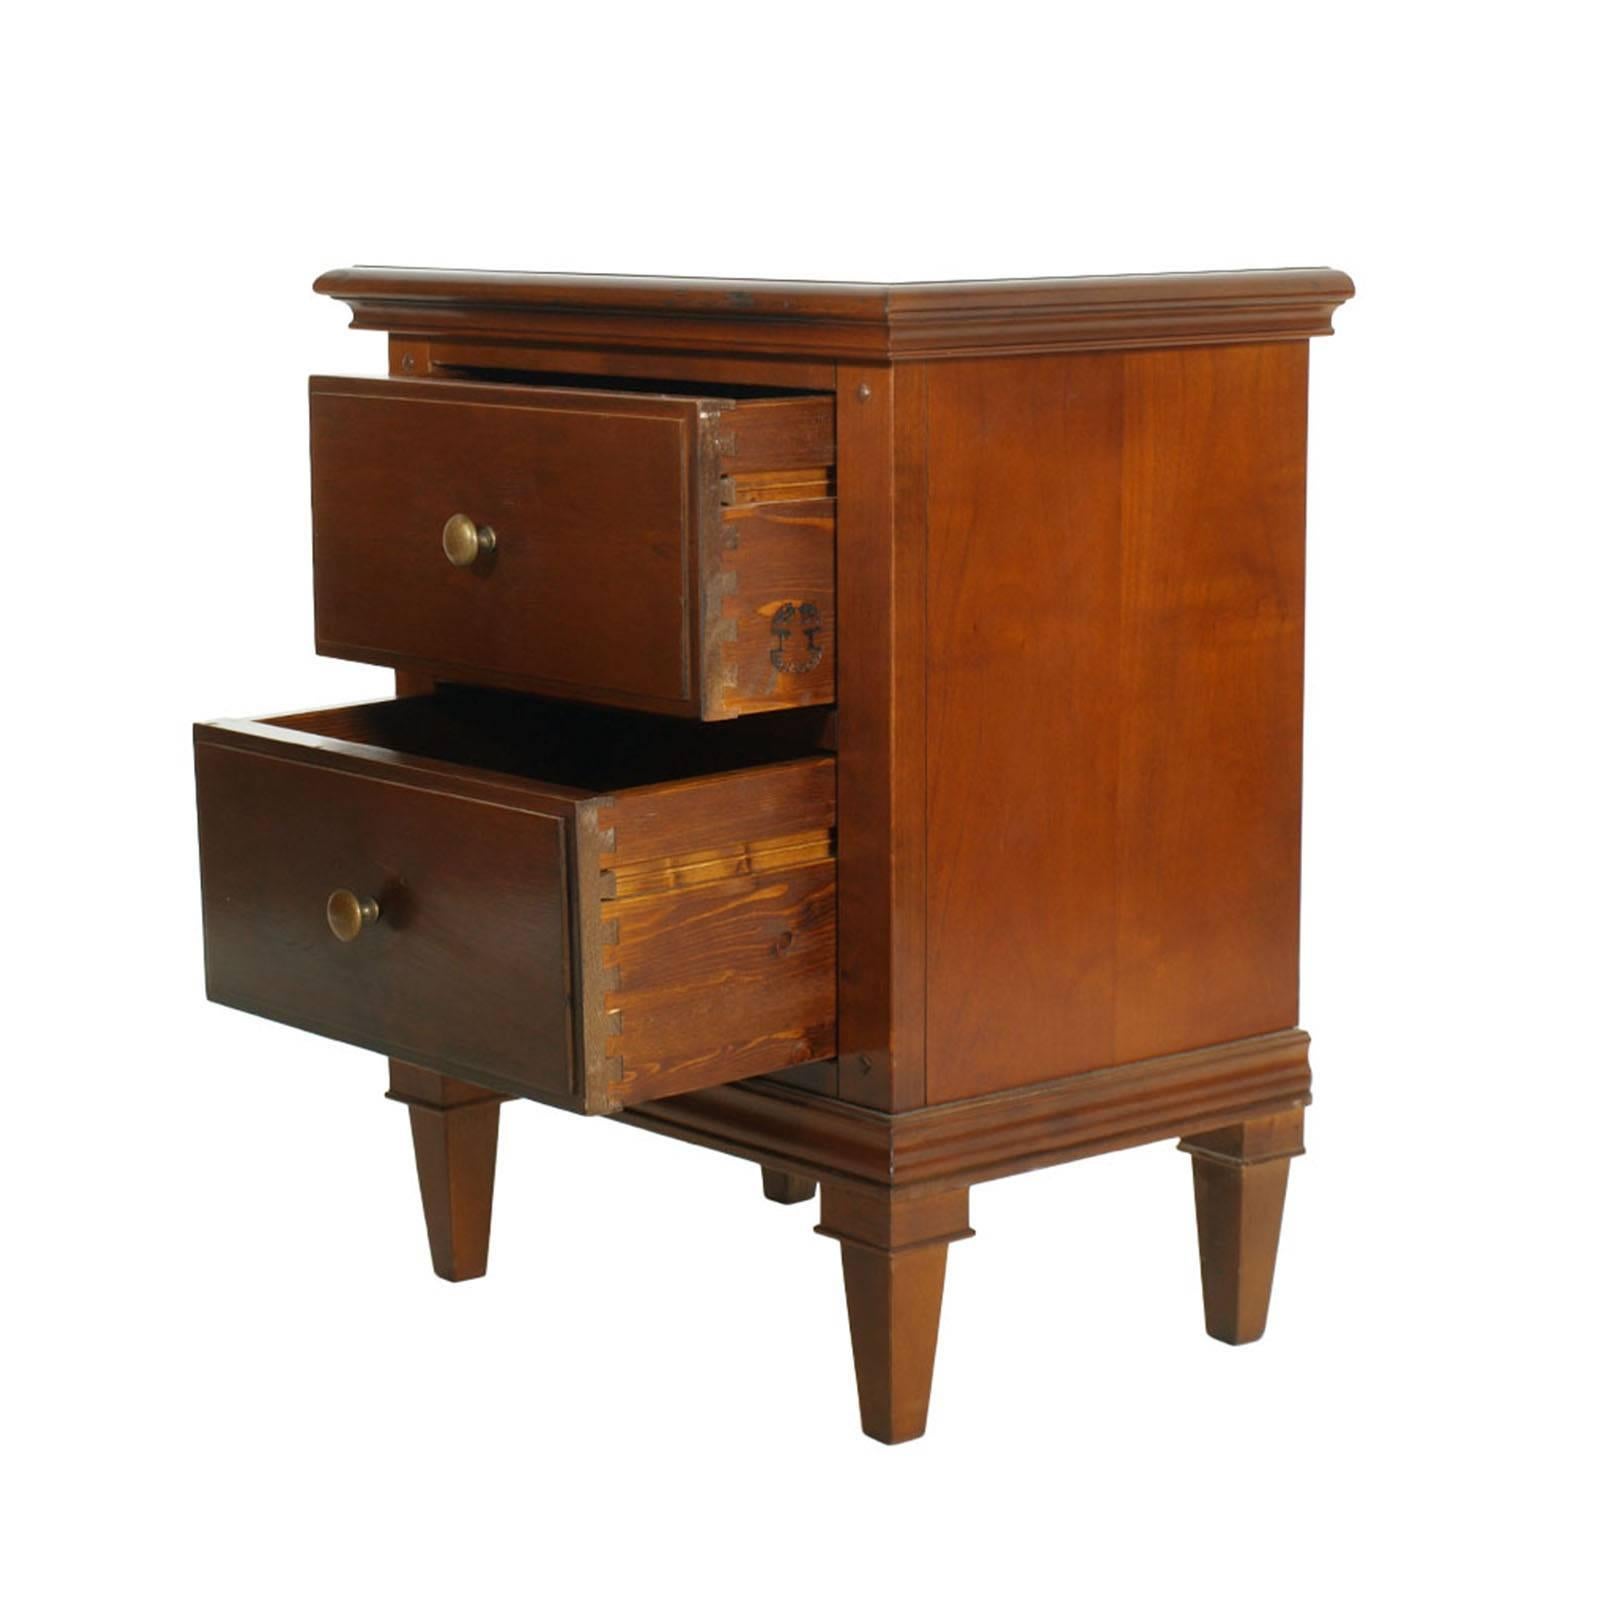 Mid-20th century Directoire style cabinet with drawers, nightstand, in walnut, restored and polished to wax

Measure cm: H 65 x W 54 x D 37.